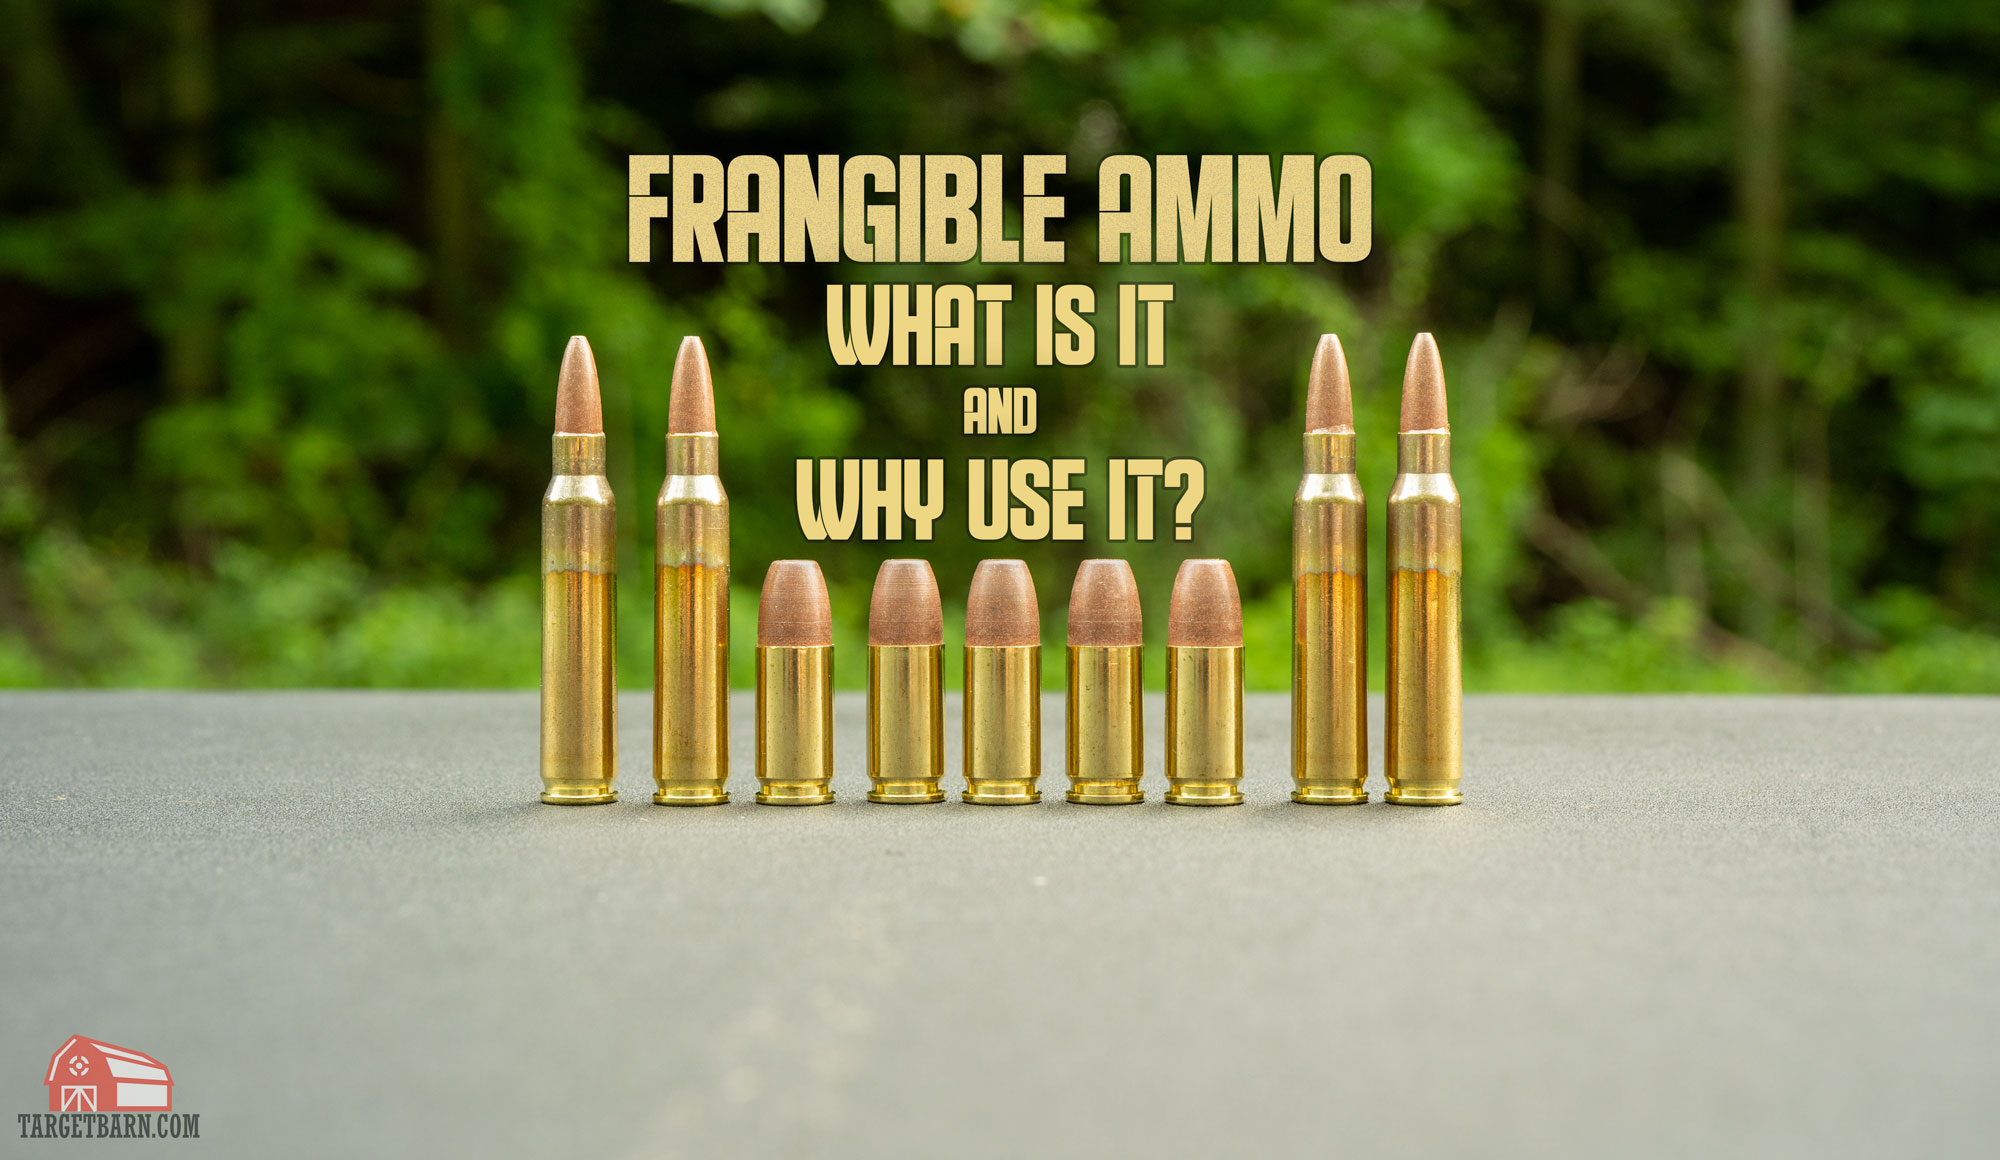 What is Frangible Ammo